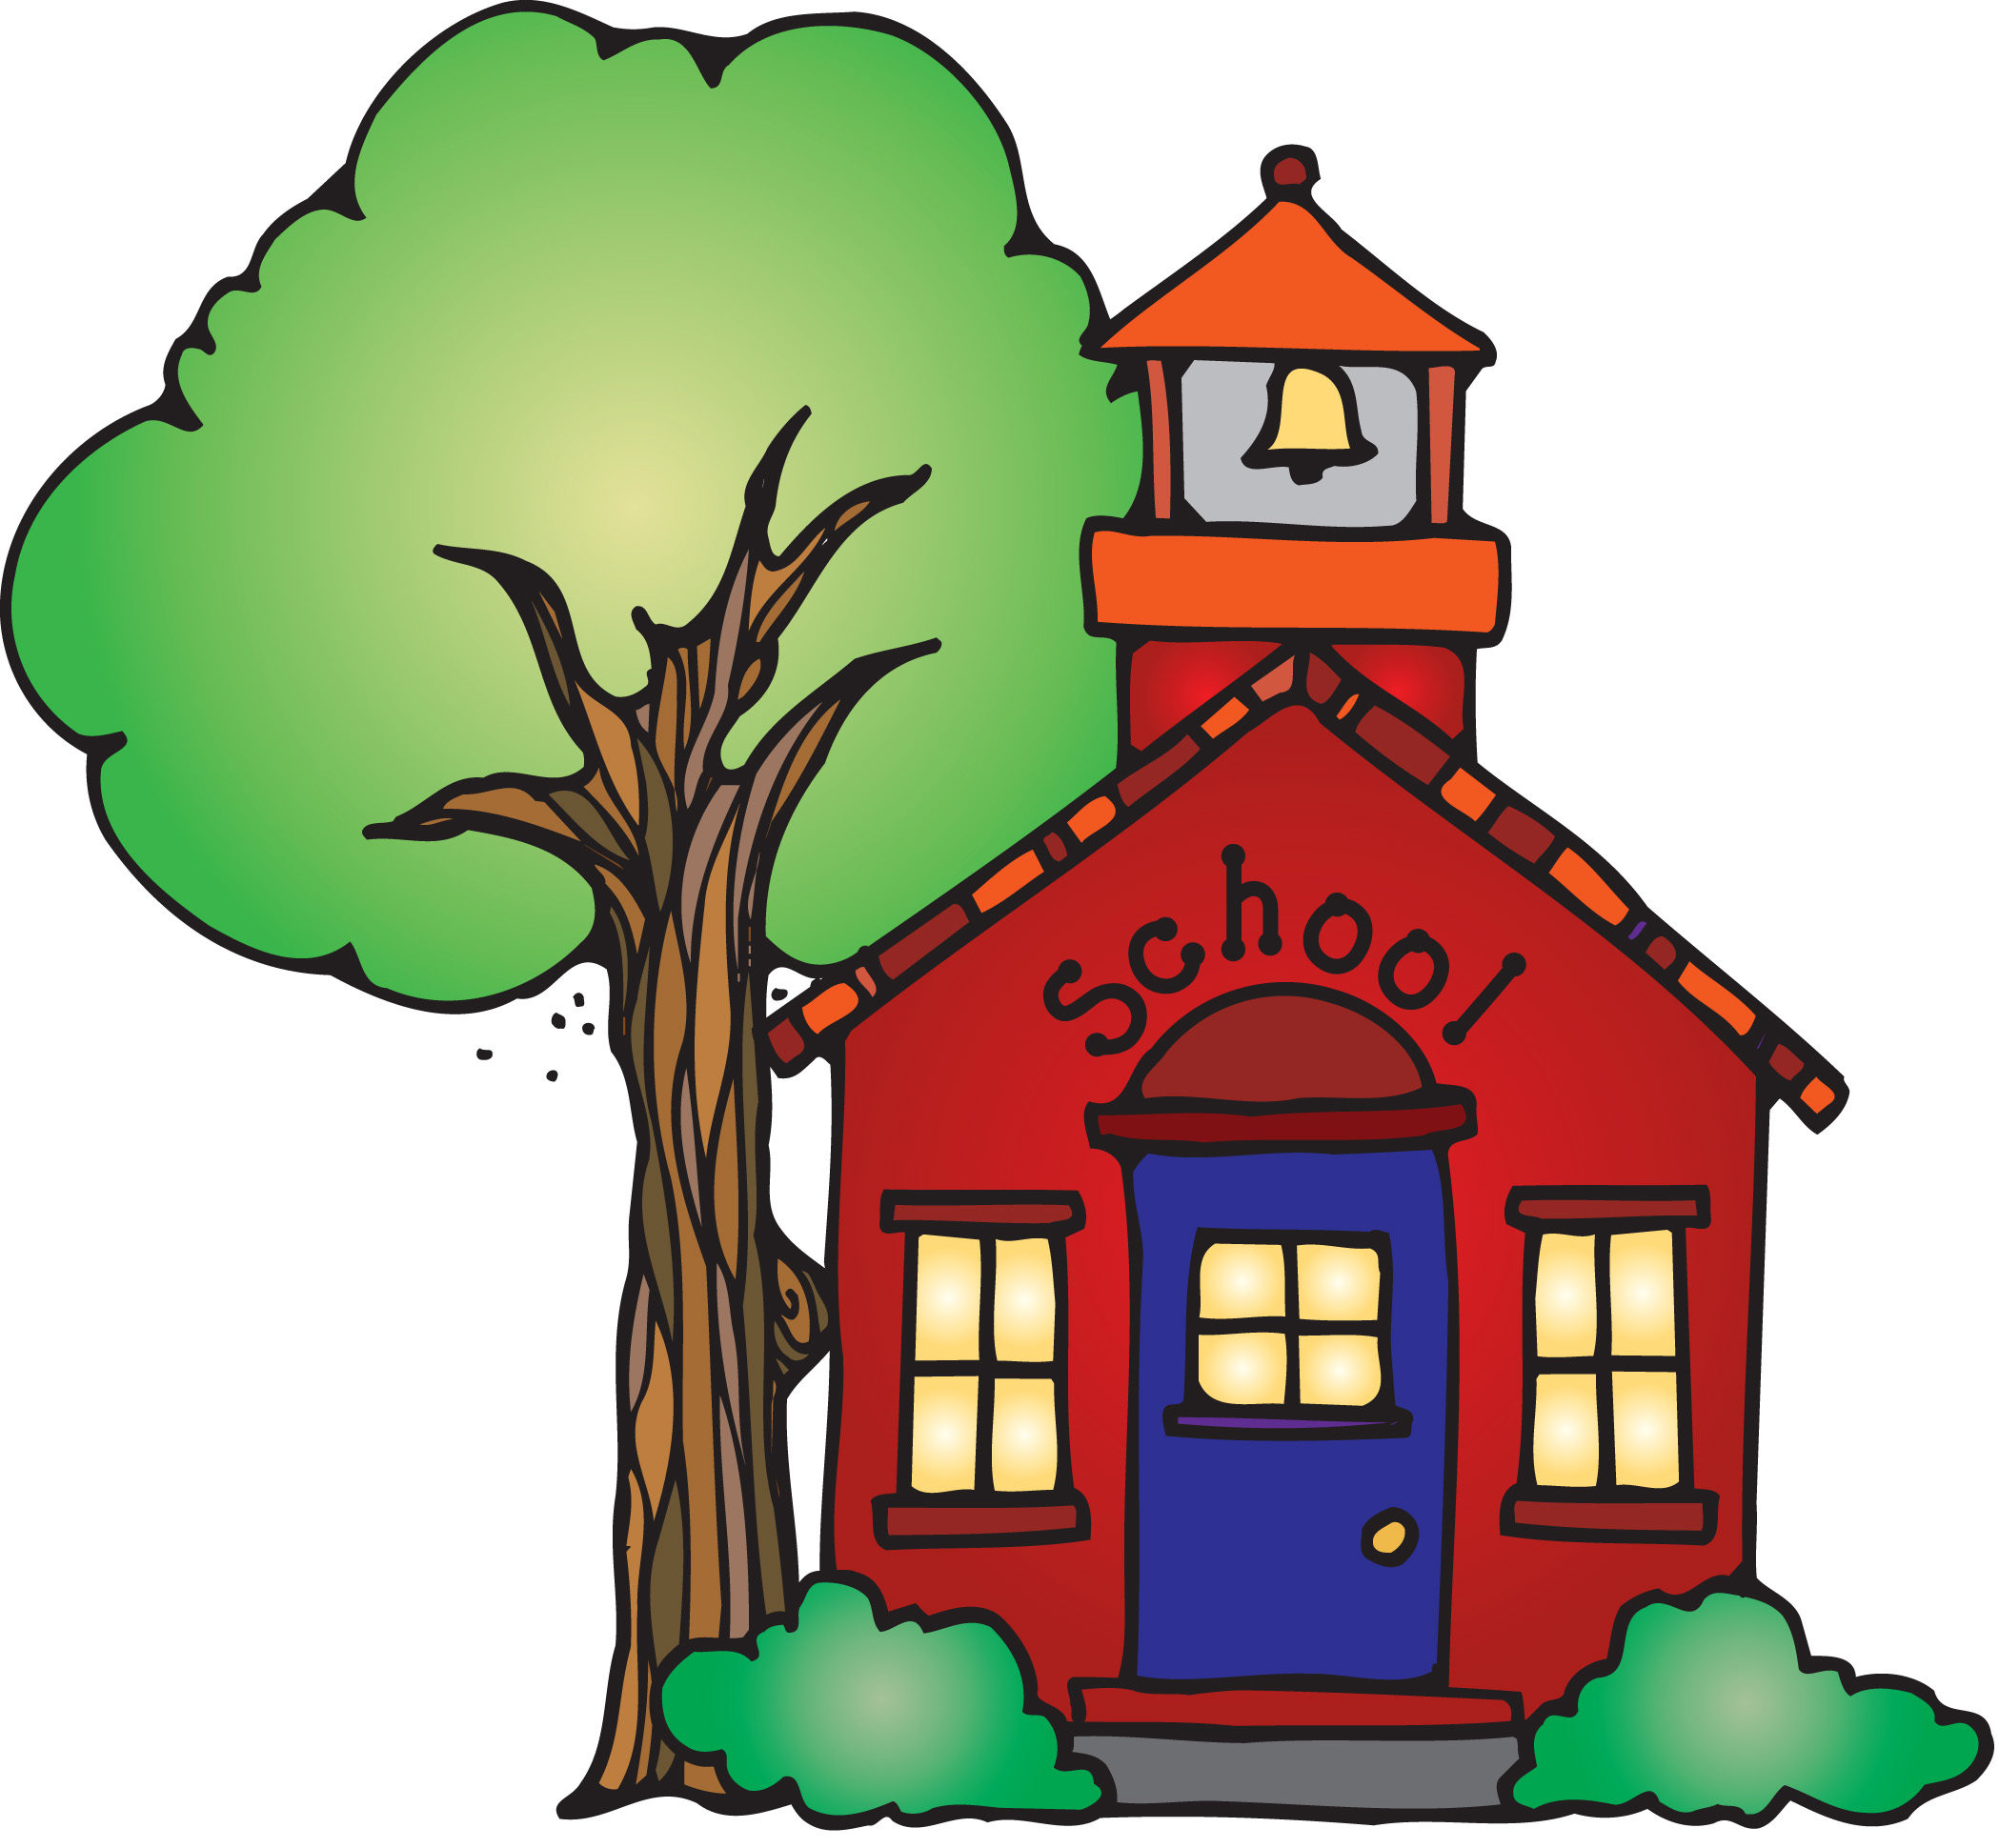 Pictures Of School House - ClipArt Best